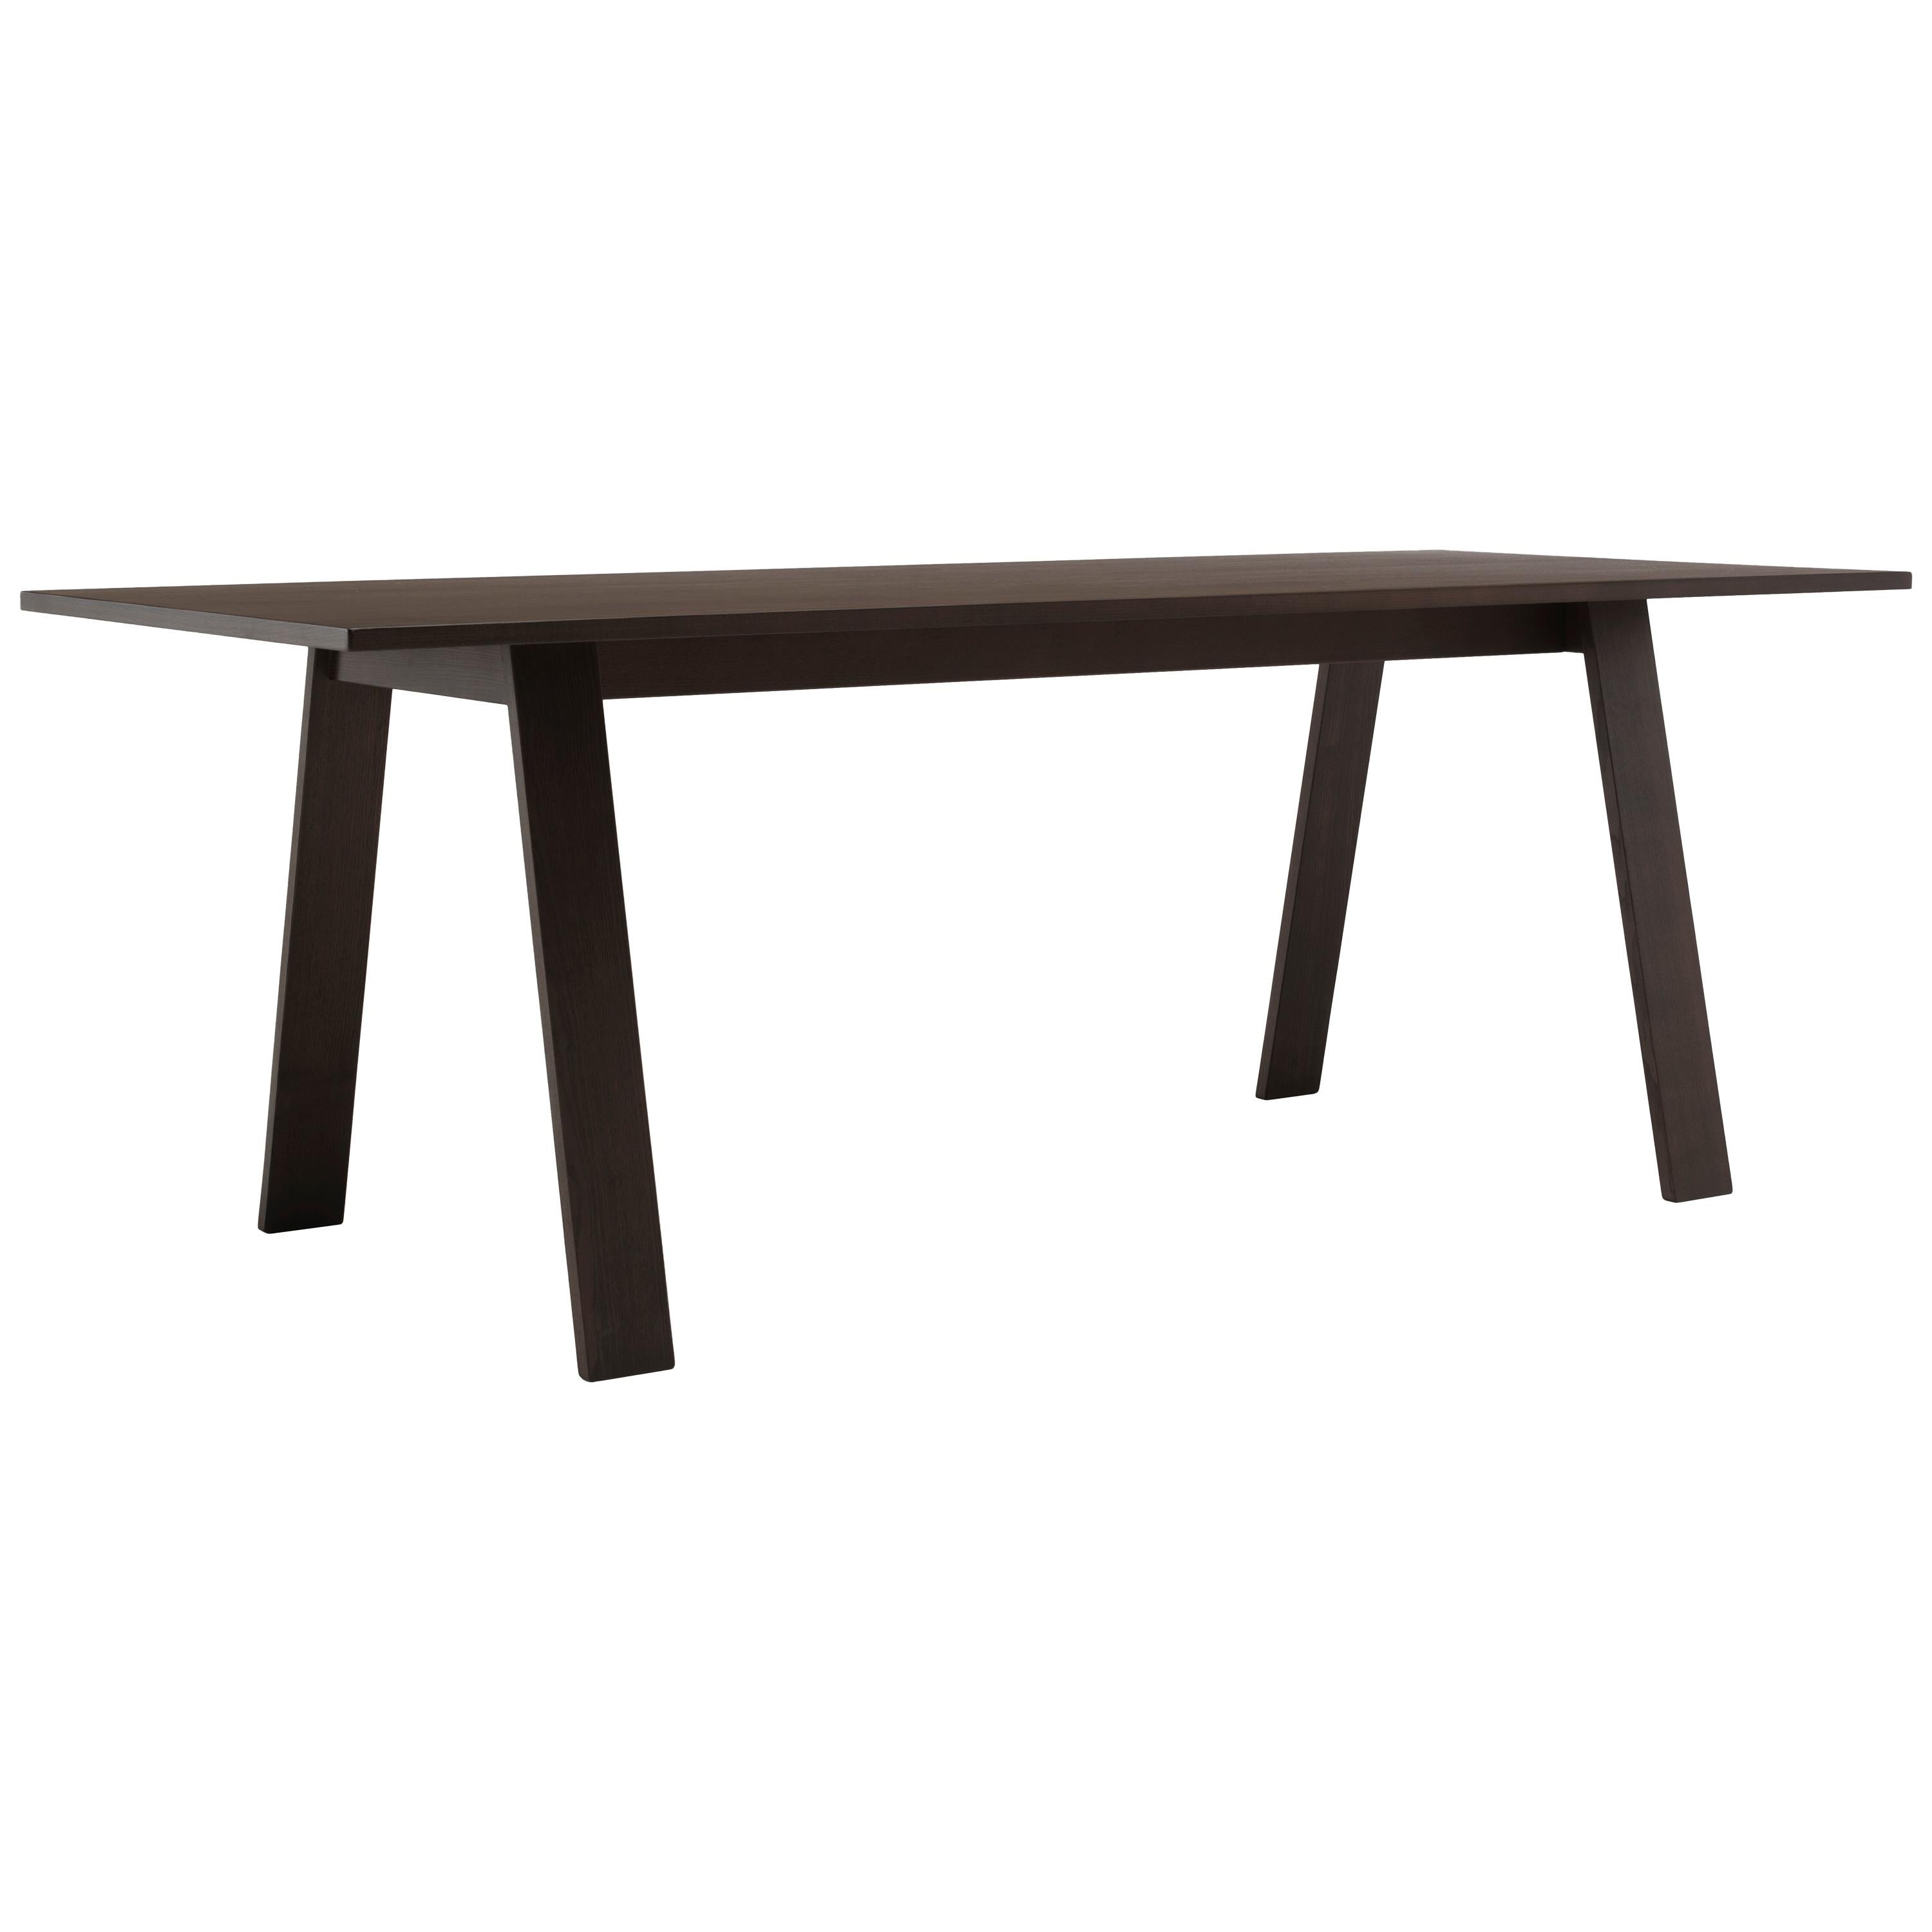 For Sale: Brown (115_Wenge Stained Ash) Jasper Morrison Rectangular Bac Table in Solid Ashwood for Cappellini